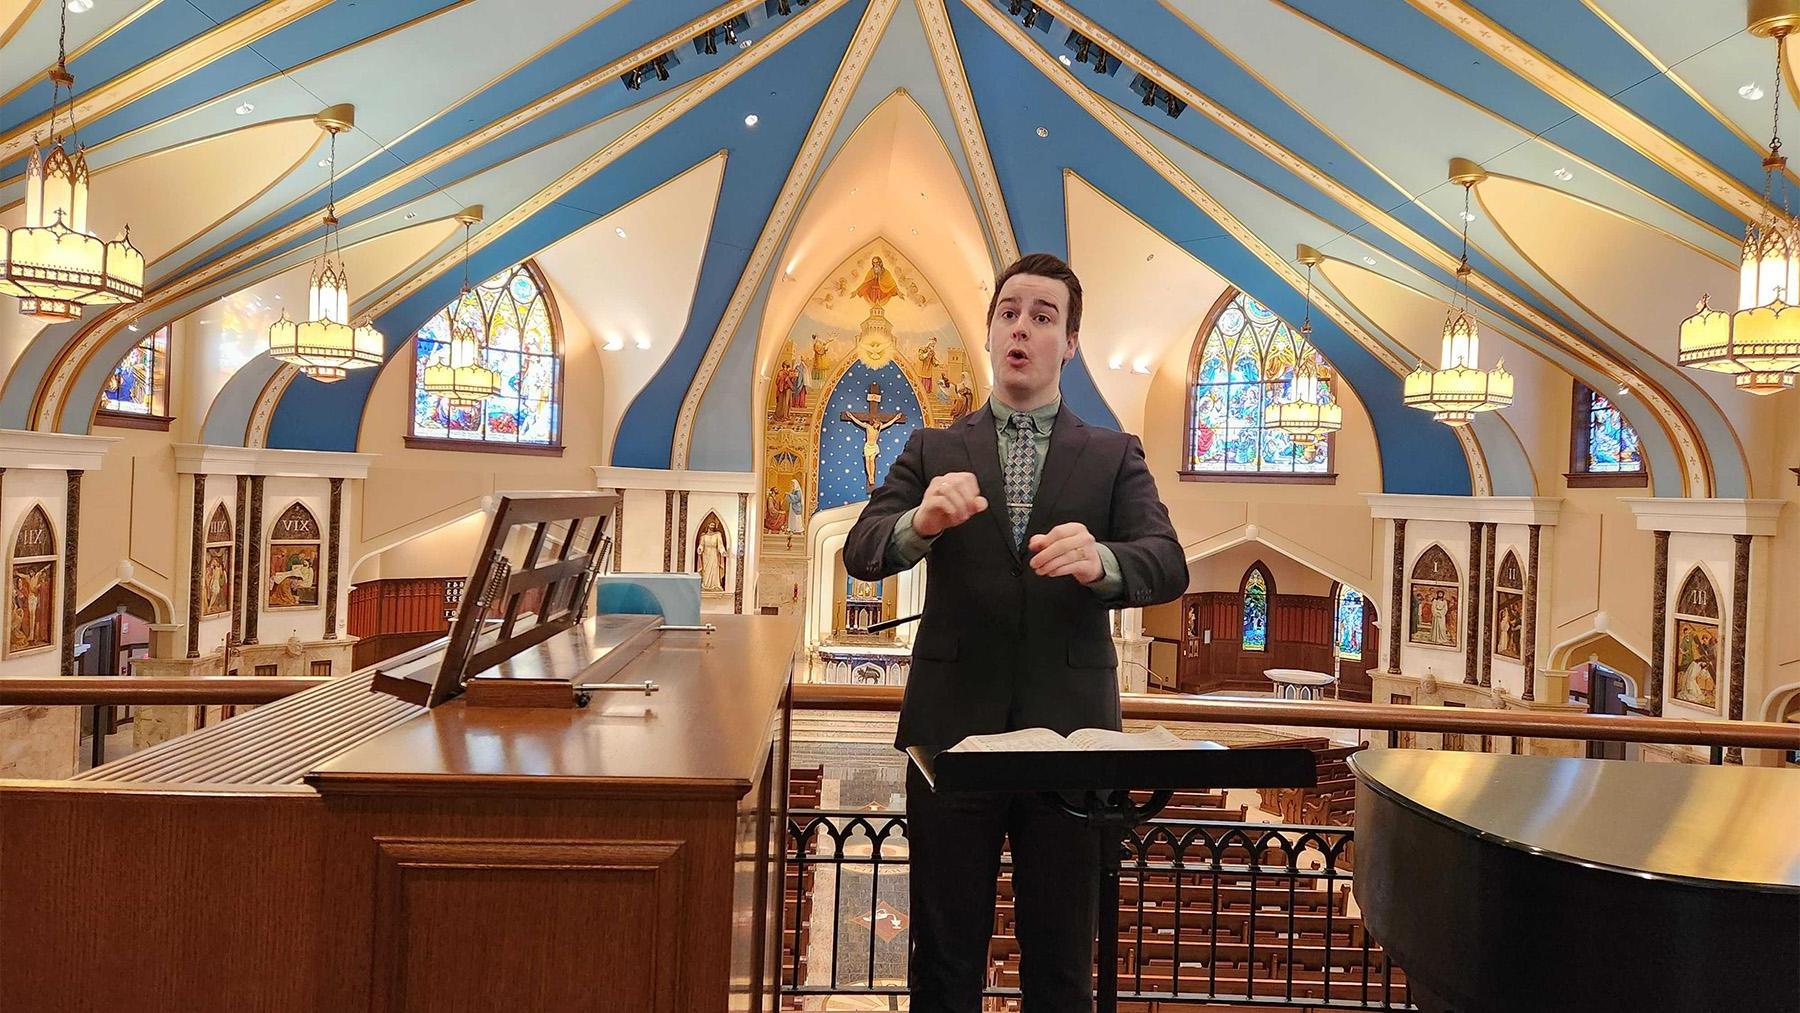 Mcguire Conducting in a church